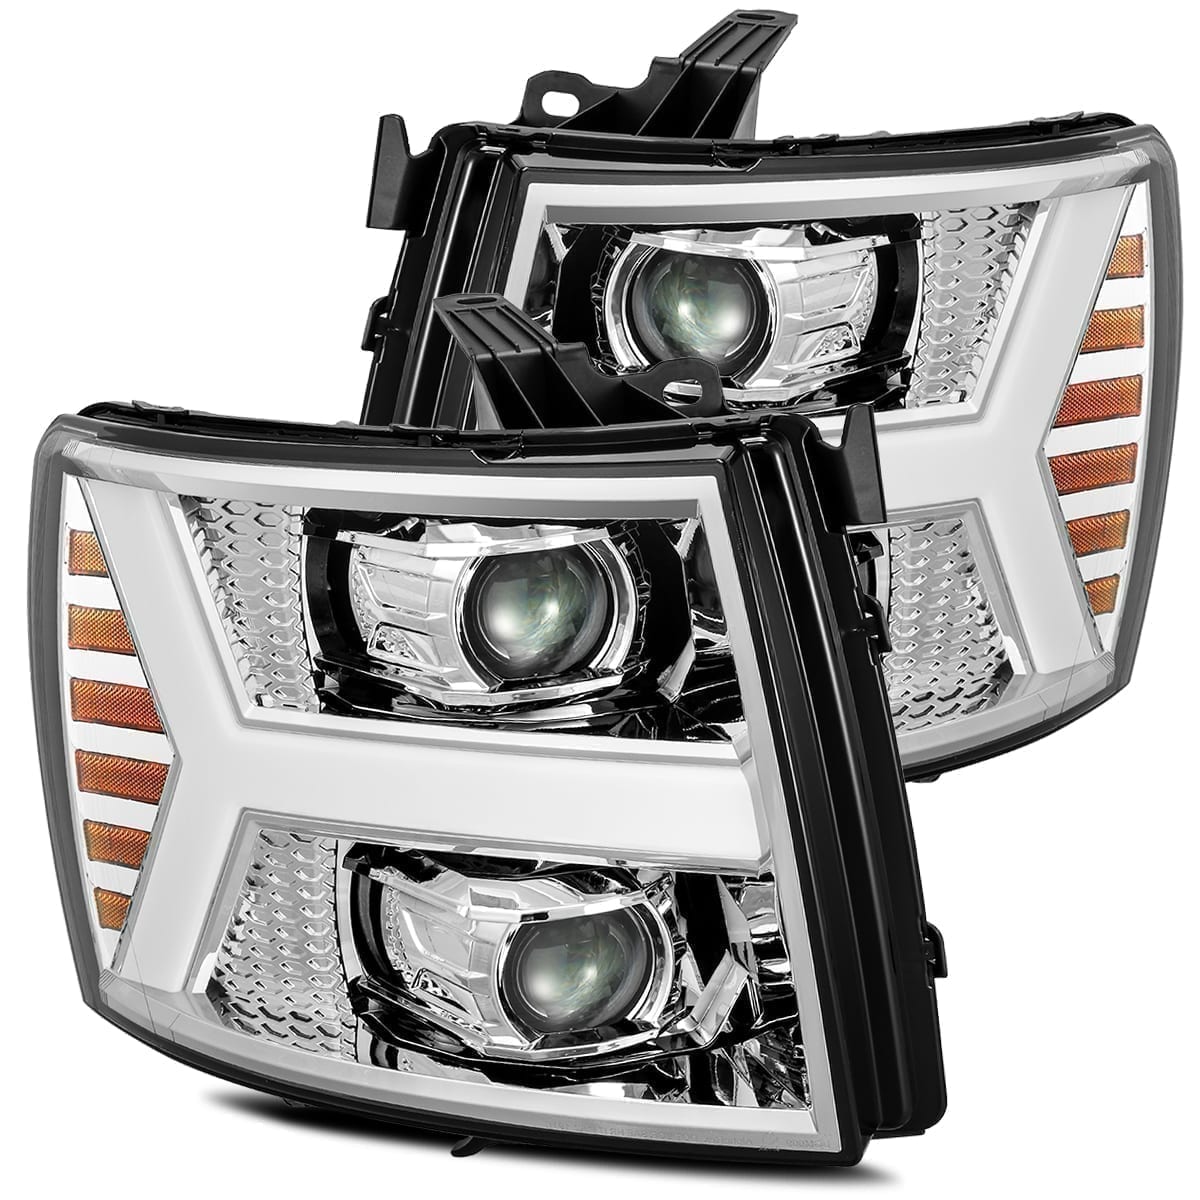 Alpharex Pro-Series LED Projector Headlights Chrome Chevy 2500/3500 07-14